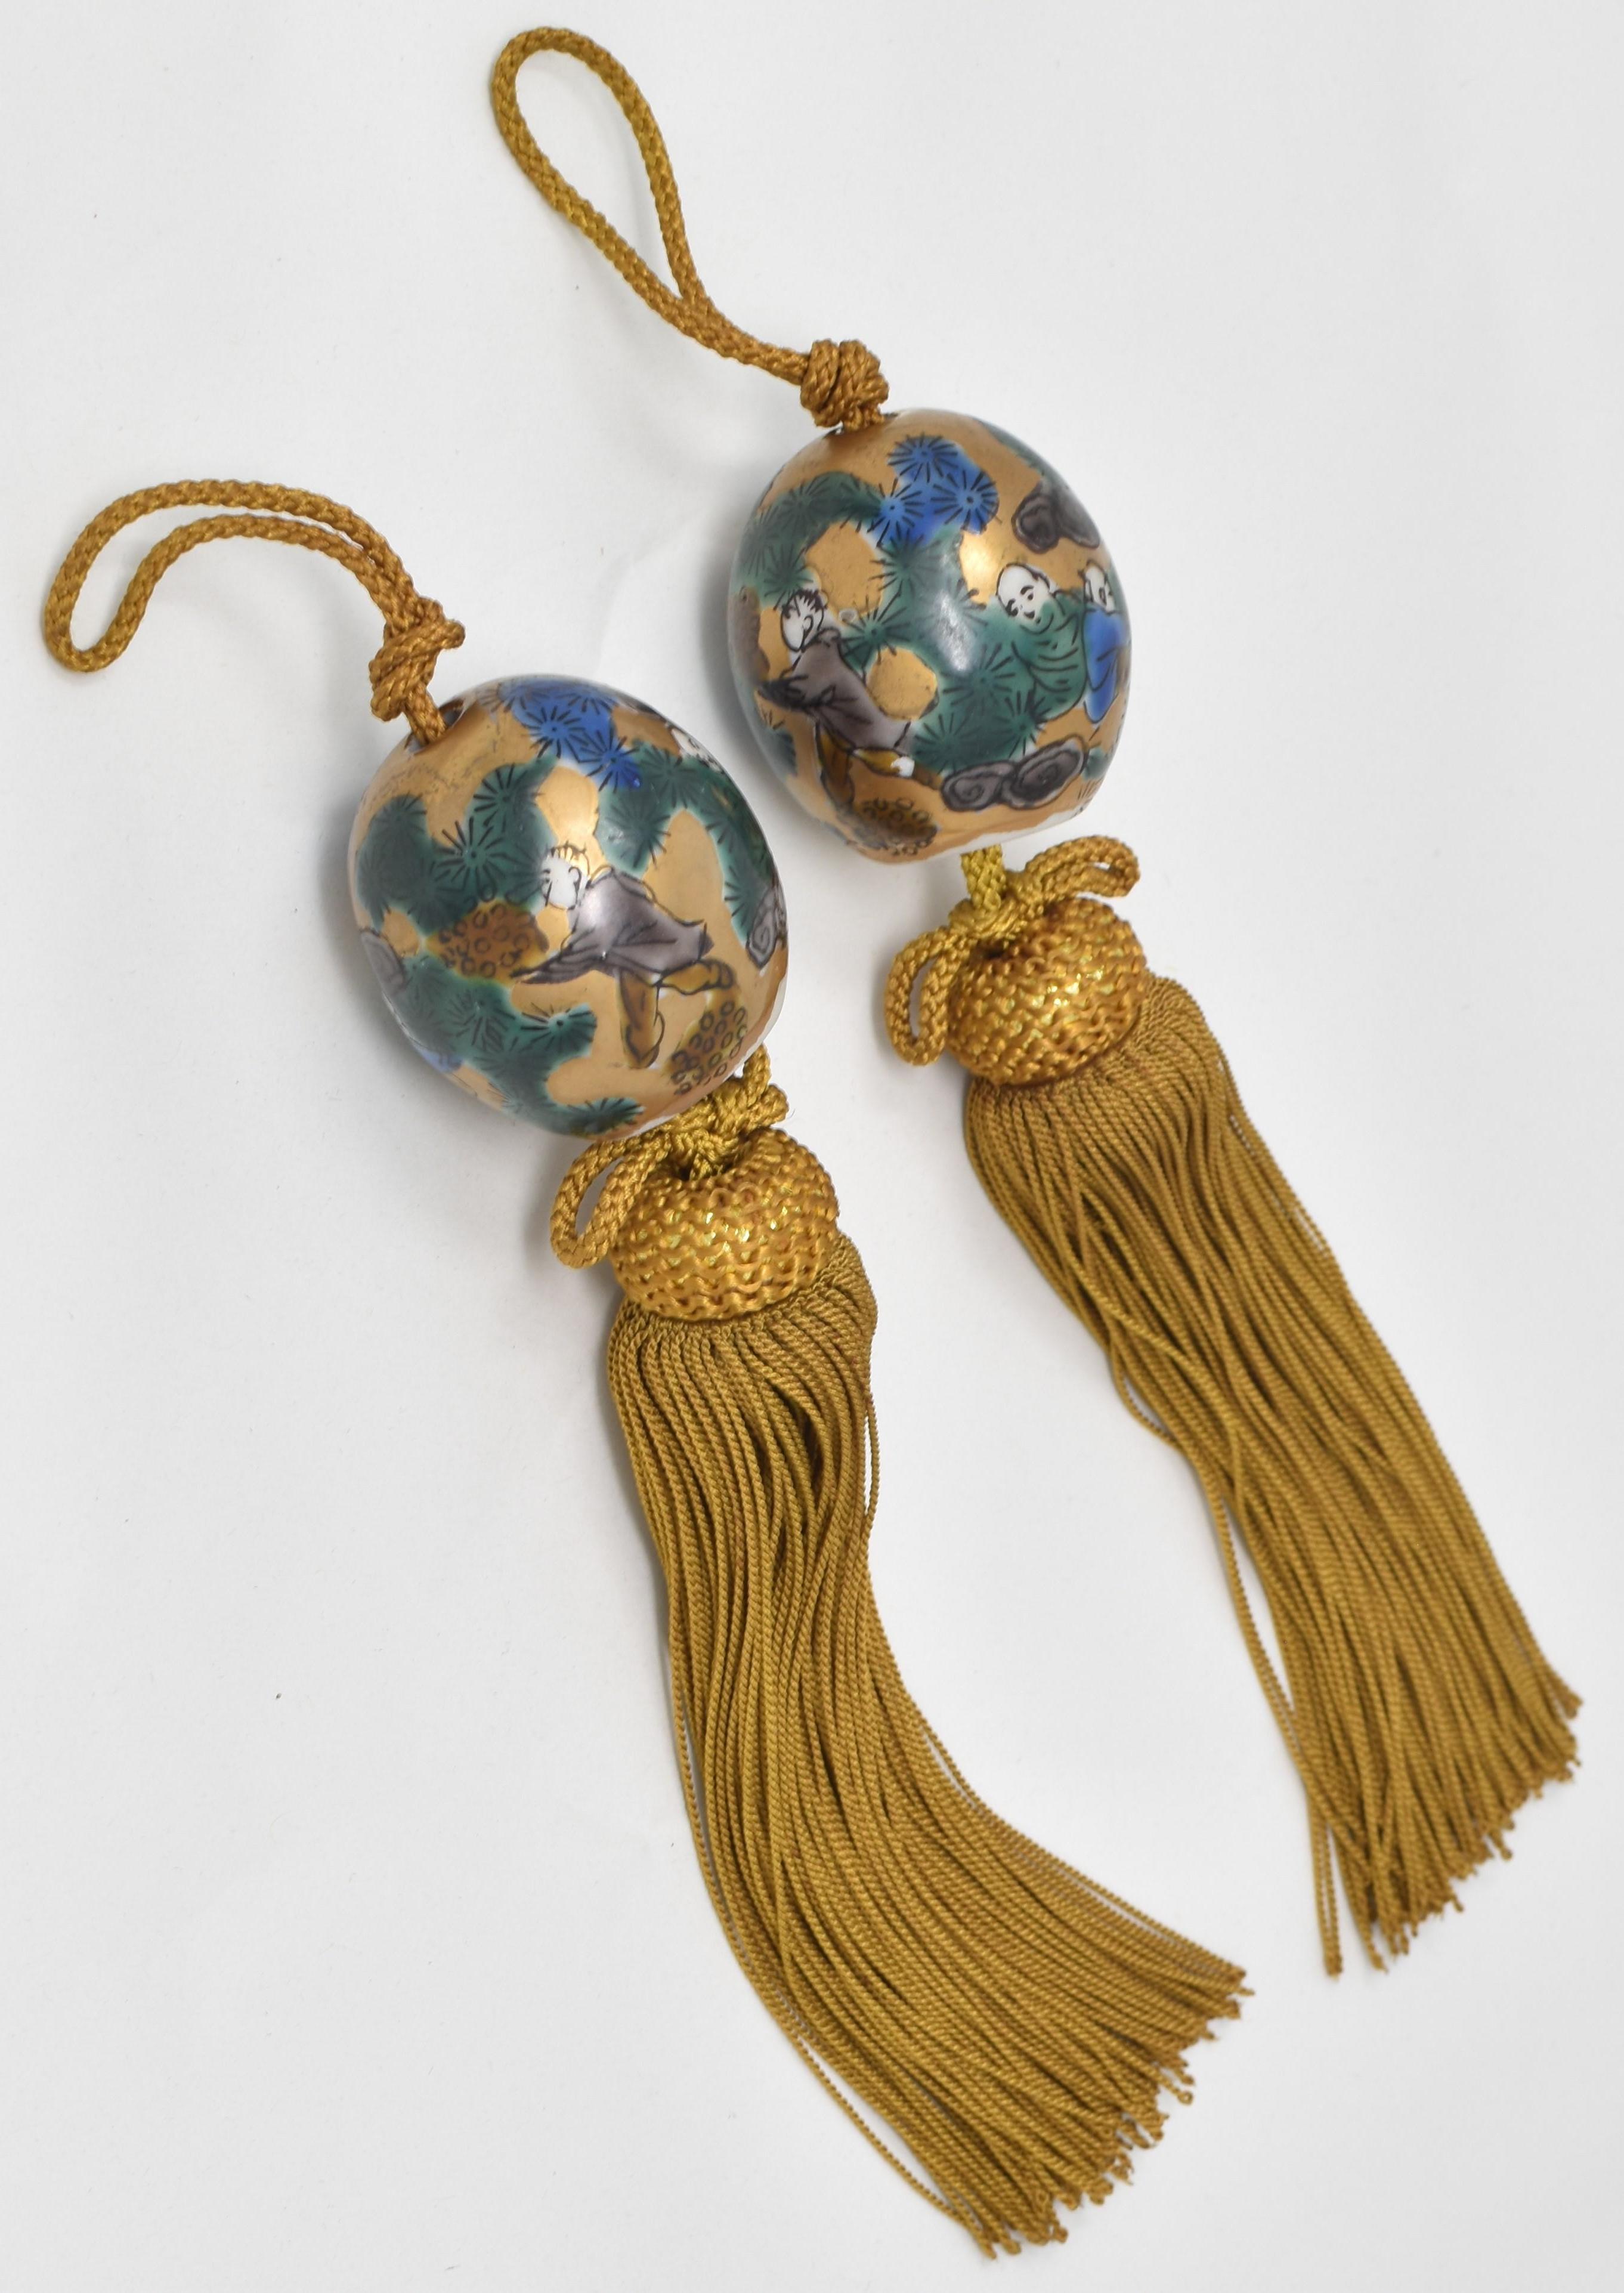 This attractive pair of vintage porcelain scroll weights (fuchin) is from the Kutani region of Japan.
Dating from the prewar Showa period of circa 1930, these egg-shaped scroll weights are gilded and hand-painted in the celebrated Mokubei style of